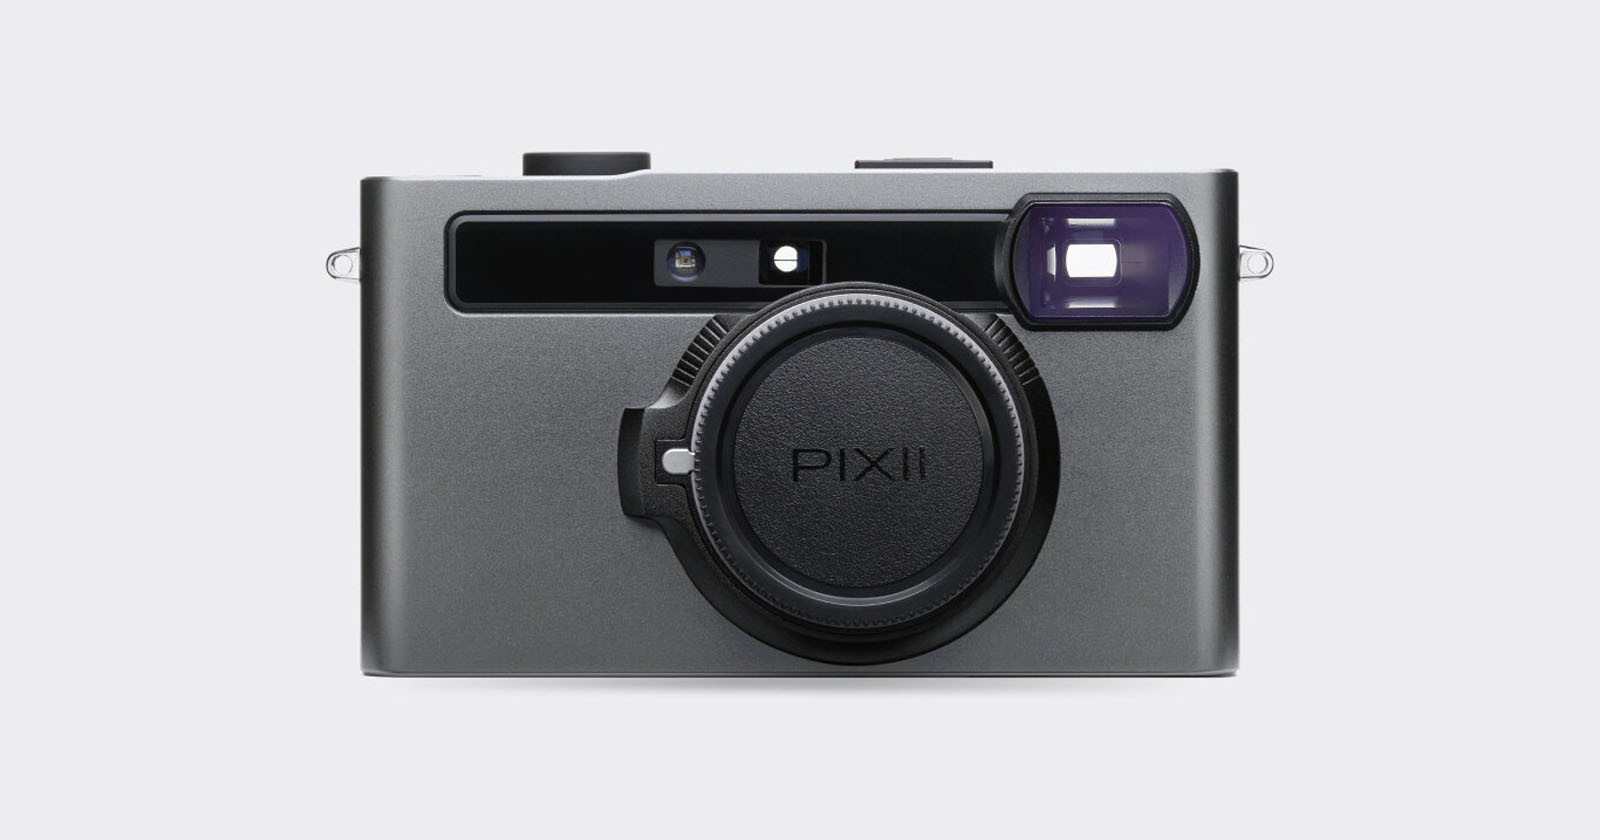 The New Pixii Camera is the Worlds First to Use a 64-Bit Processor